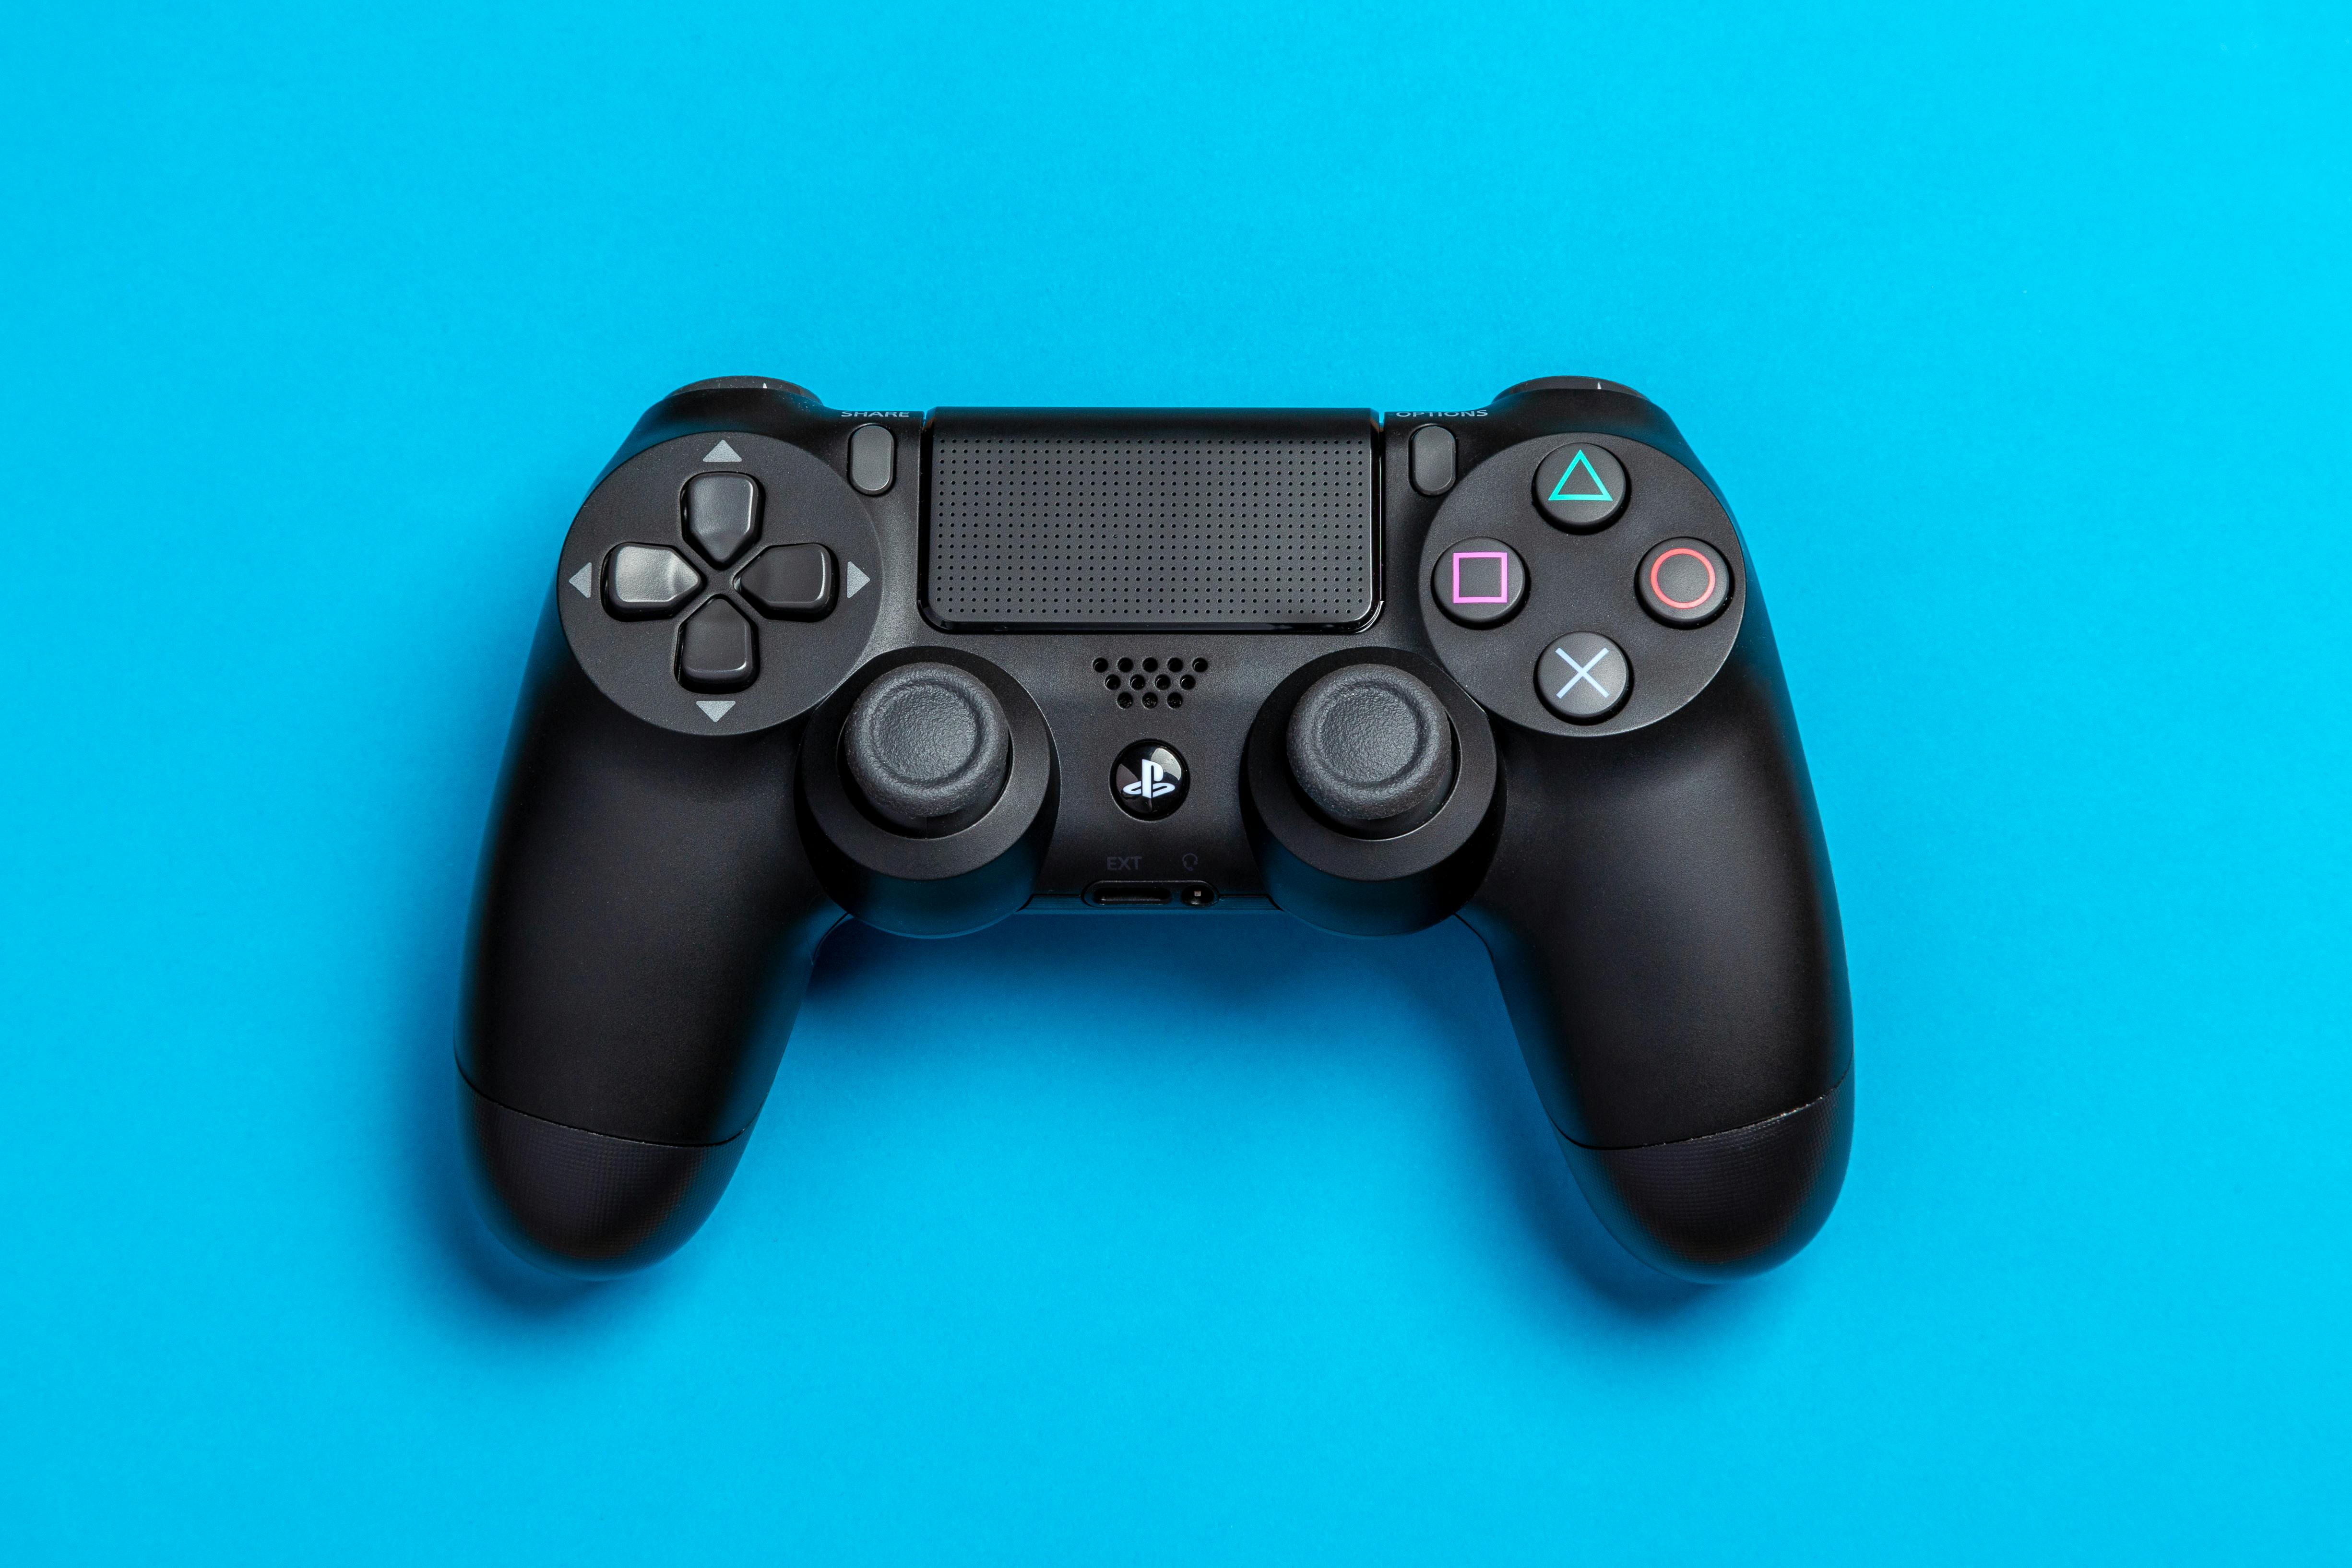 Flat Photo of Black Sony PS4 Game on Blue Background · Free Stock Photo